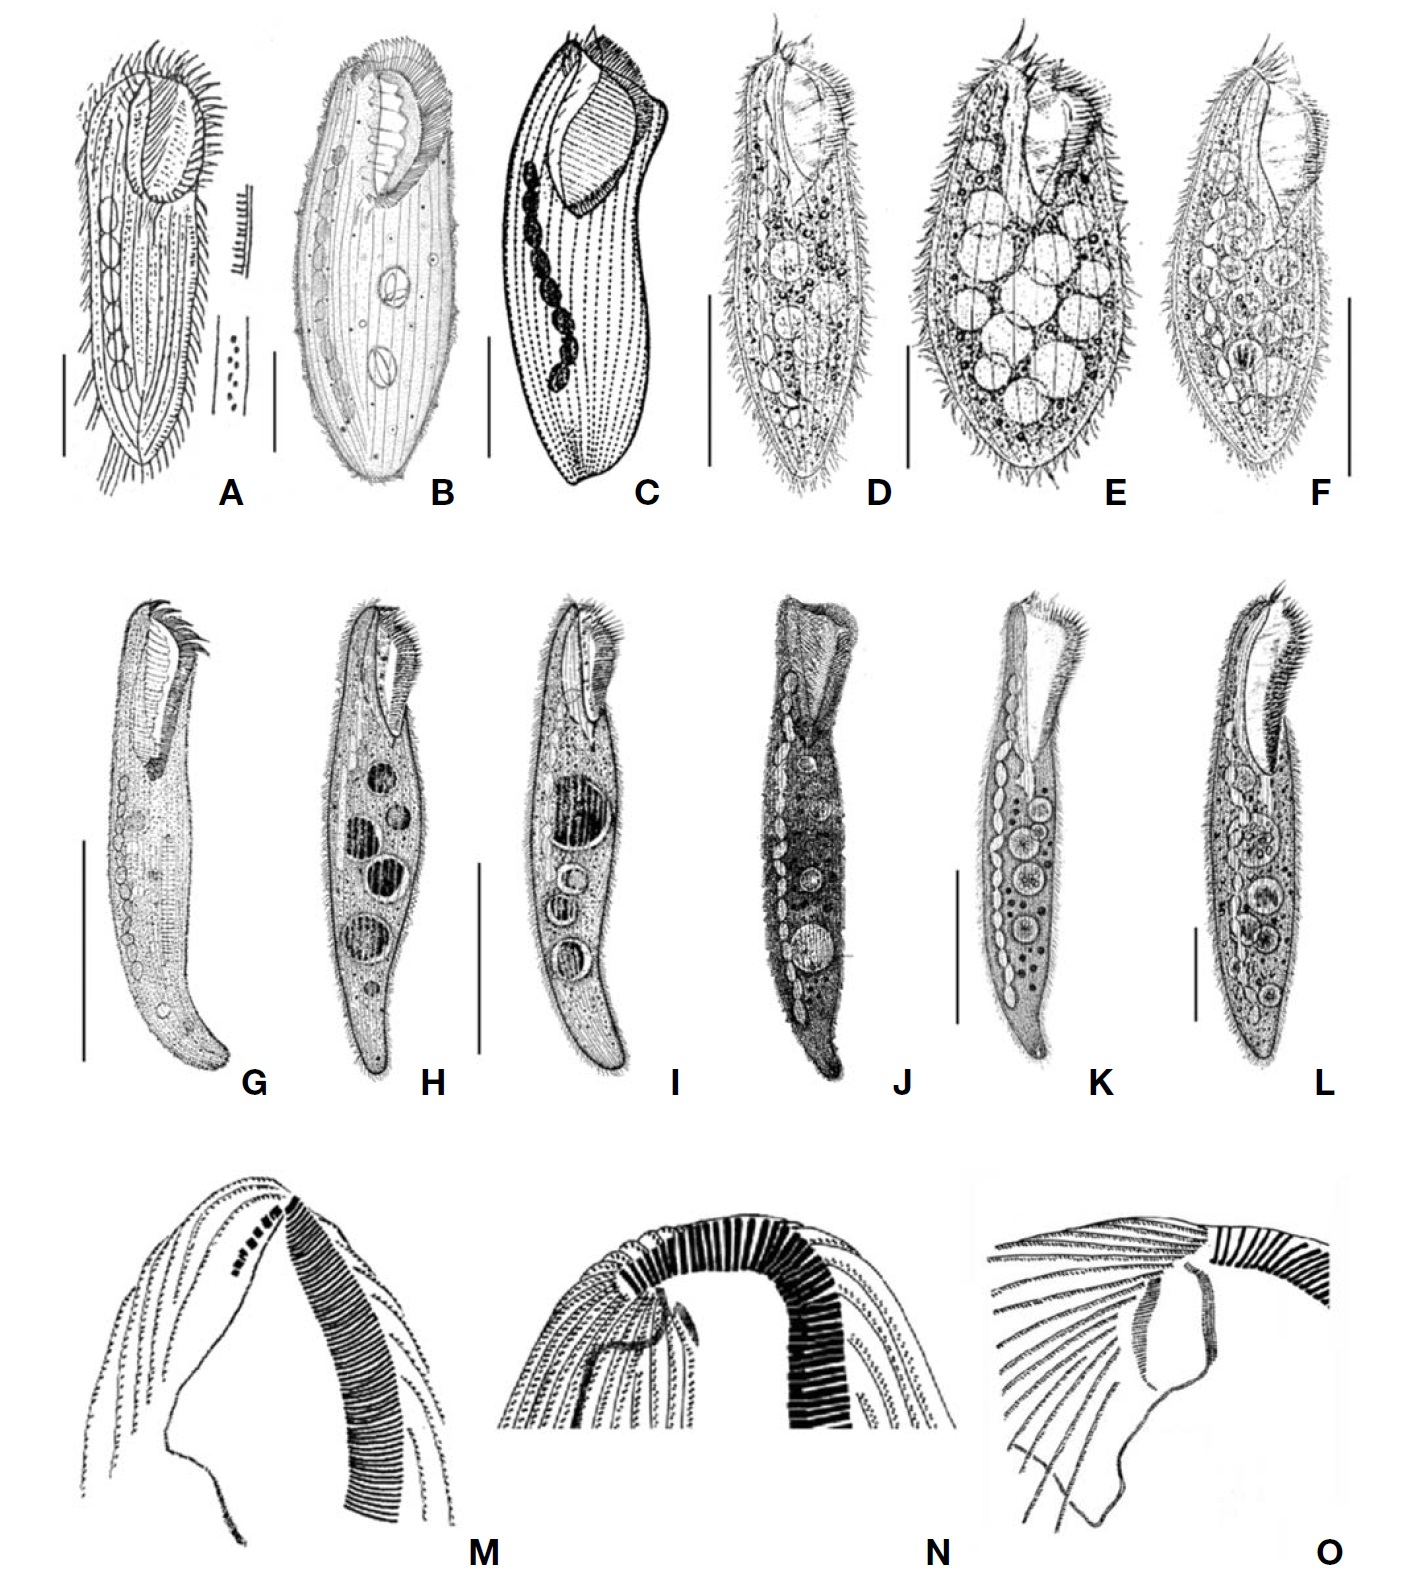 A-F, M, Condylostoma curva Burkovsky, 1970 (A, from Kahl, 1932; B, from Dragesco J, Dragesco-Kern?is A, 1986; C, from Burkovsky, 1970; D-F, from Song et al., 2003); M, The apparatus of frontal cirri (from Song et al., 2003); G-L, N, C. minutum Bullington, 1940 (G, from Bullington, 1940; H, I, Chen et al., 2007); N, The apparatus of frontal cirrus (from Chen et al., 2007); JL, O, C. spatiosum Ozaki and Yagiu in Yagiu, 1944 (J, from Ozaki and Yagiu in Yagiu, 1944; K, L, from Shao et al., 2006); O, The apparatus of frontal cirri (from Chen et al., 2007). Scale bars: A-C, E, F=50 μm, D, G, I, L=100 μm, K=200 μm.